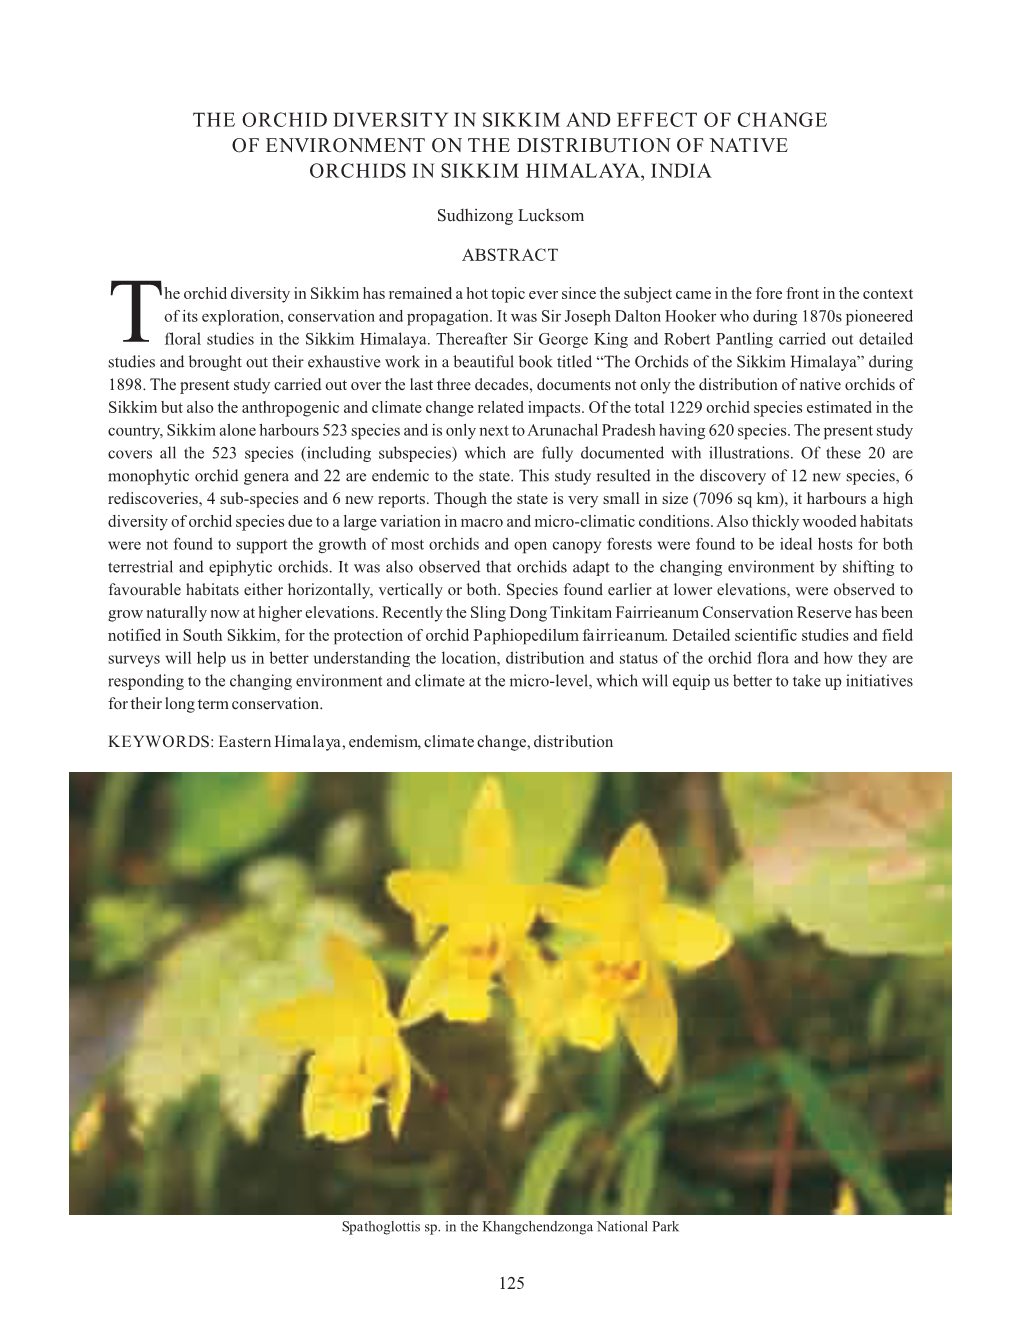 The Orchid Diversity in Sikkim and Effect of Change of Environment on the Distribution of Native Orchids in Sikkim Himalaya, India